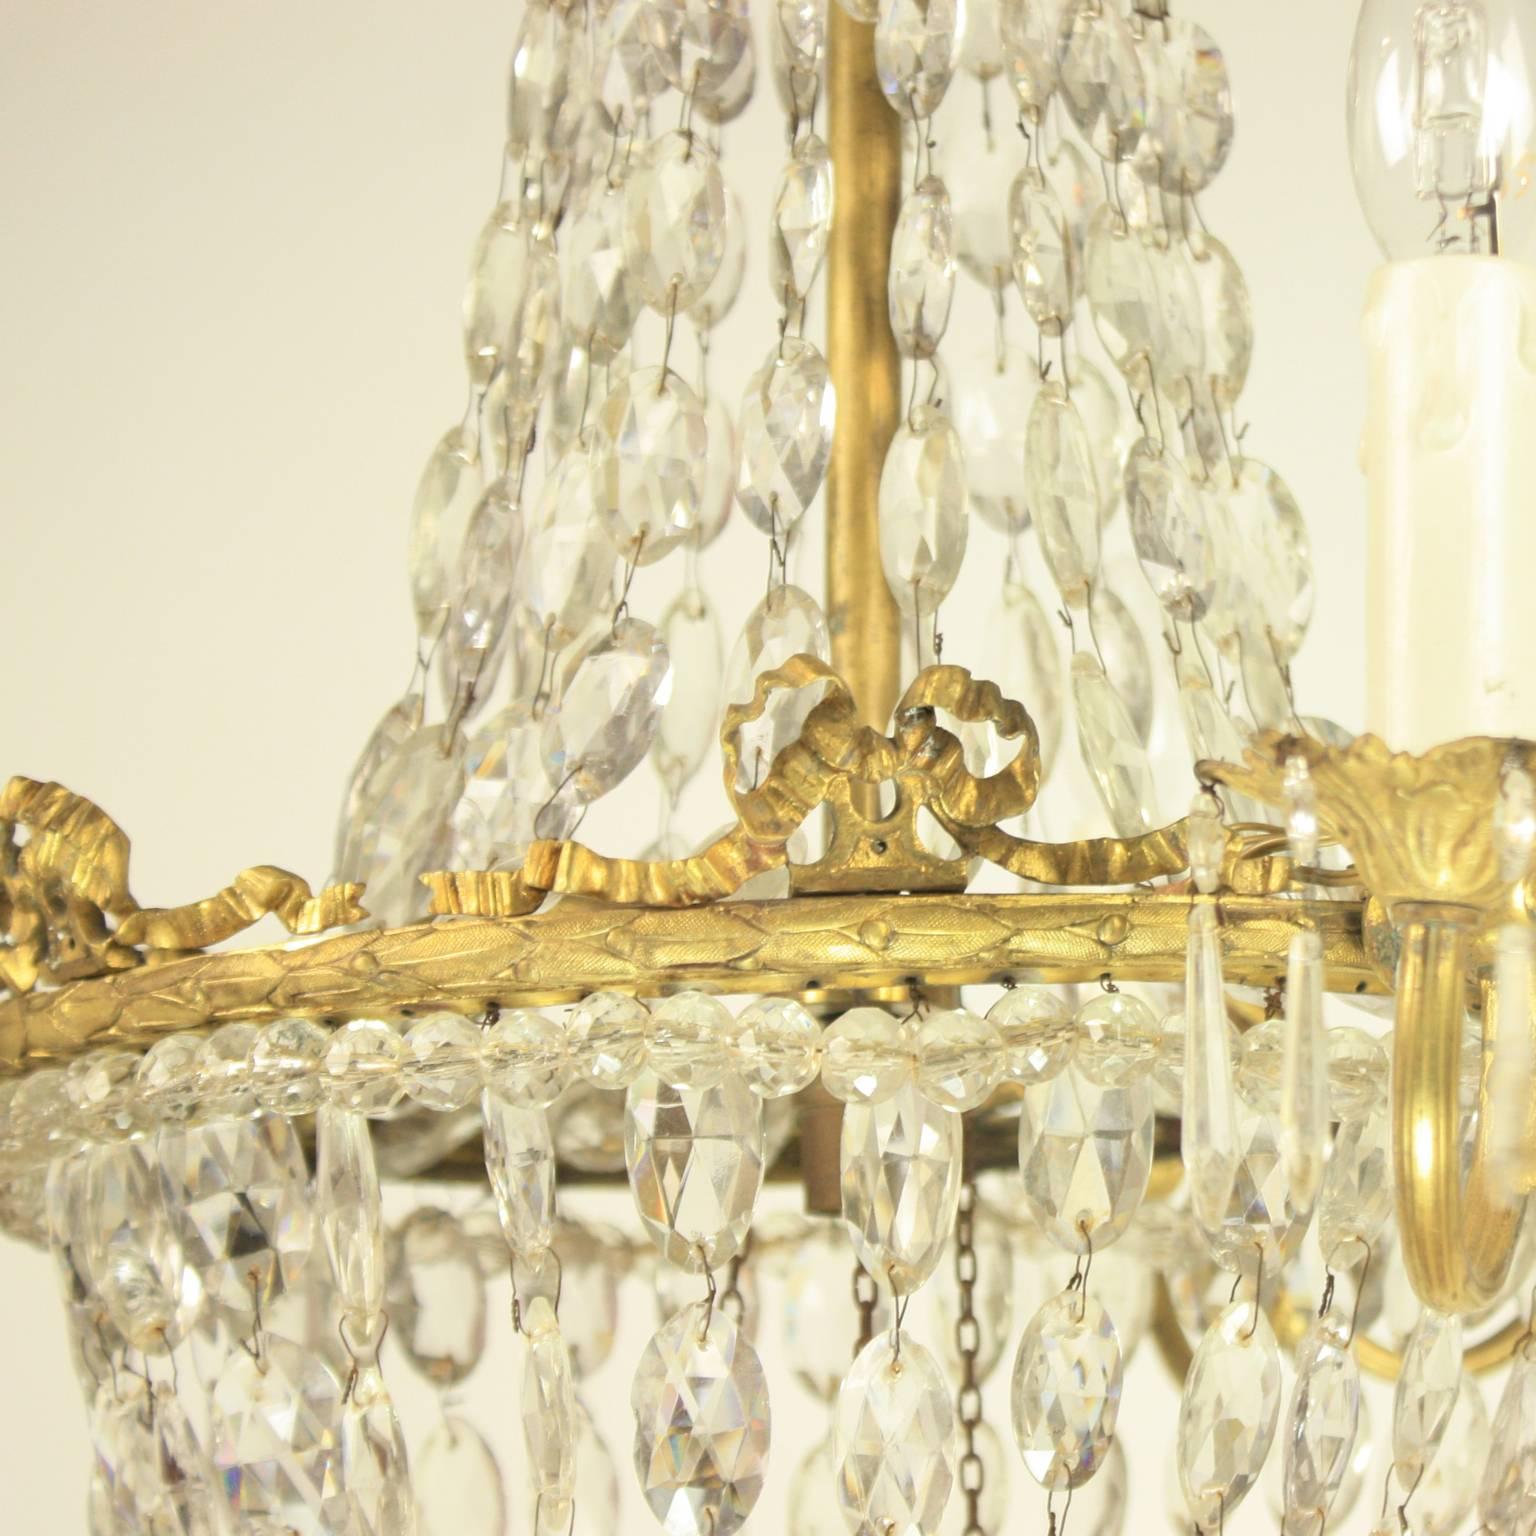 Neoclassical Revival Late 19th Century French Basket Chandelier with a Crown-Shaped Corona